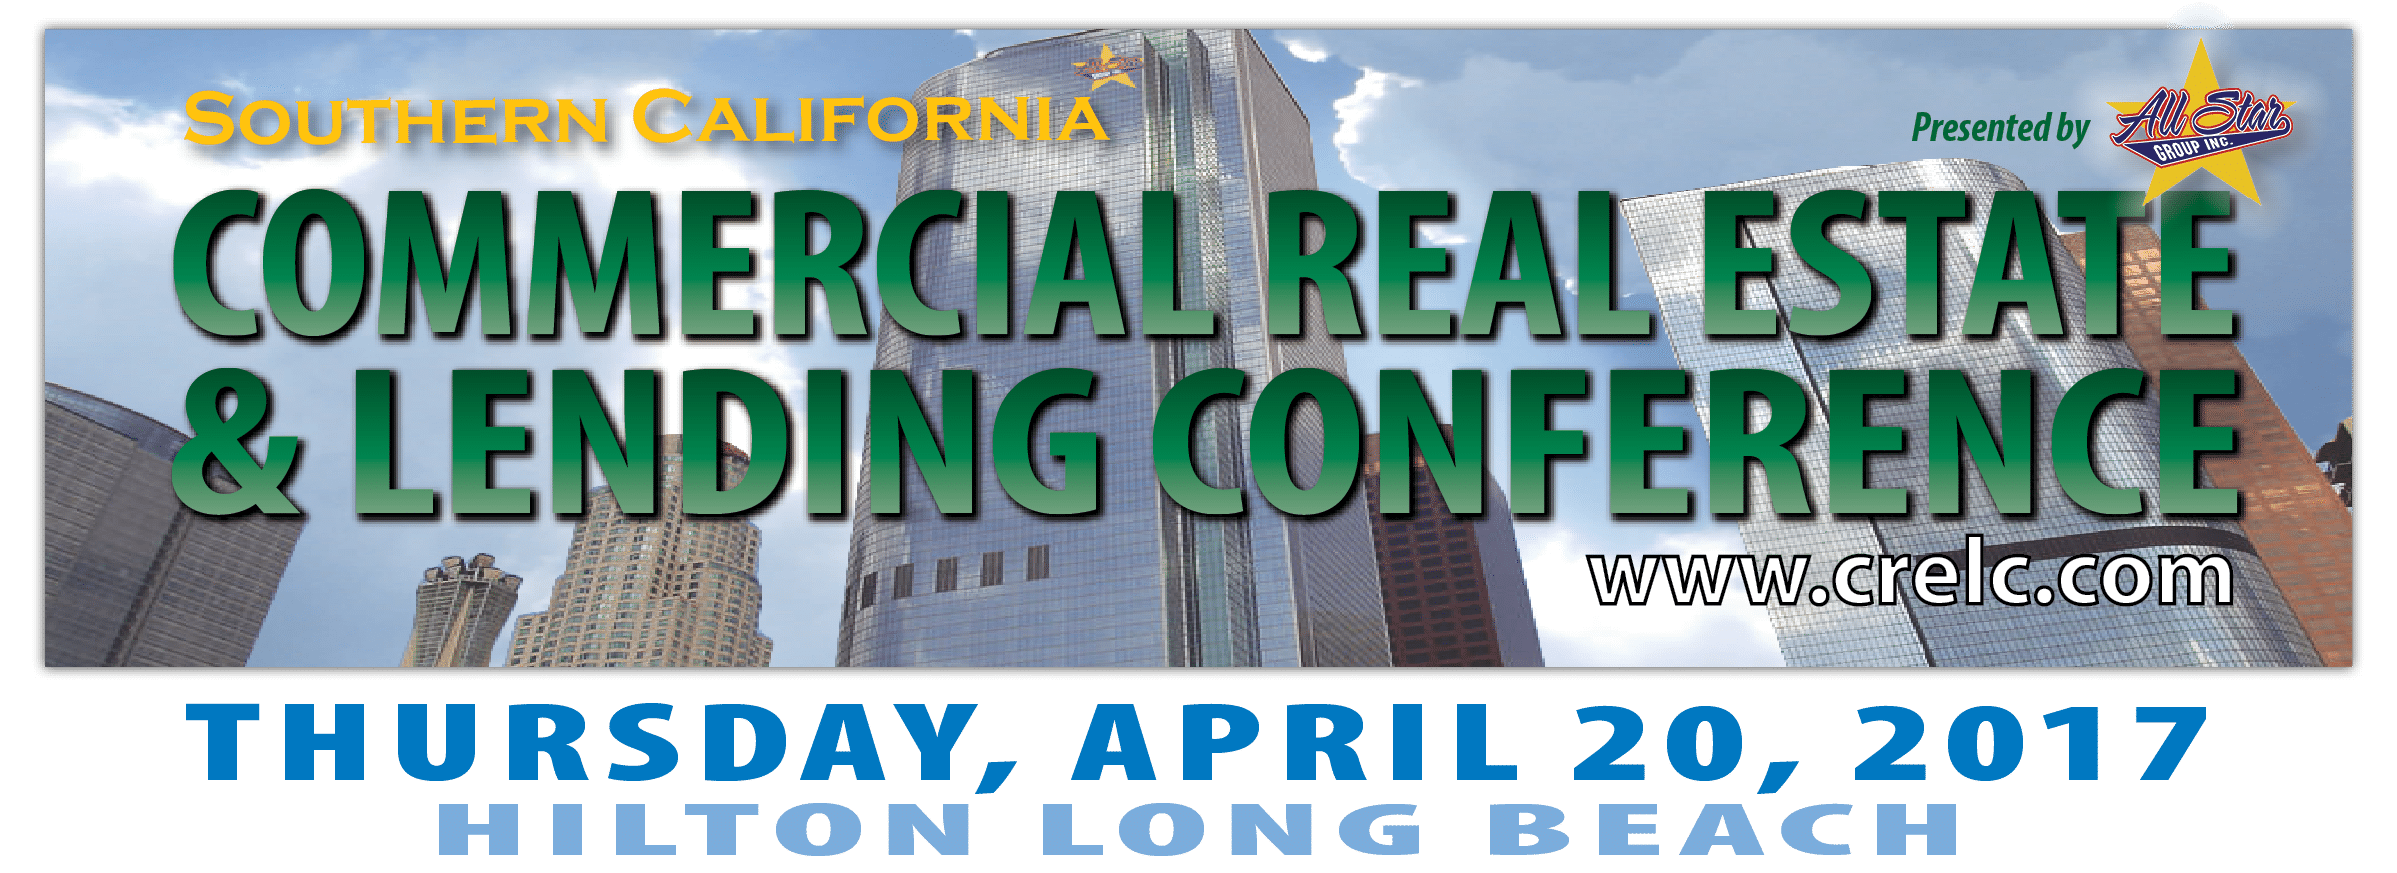 Southern California Commercial Real Estate & Lending Conference